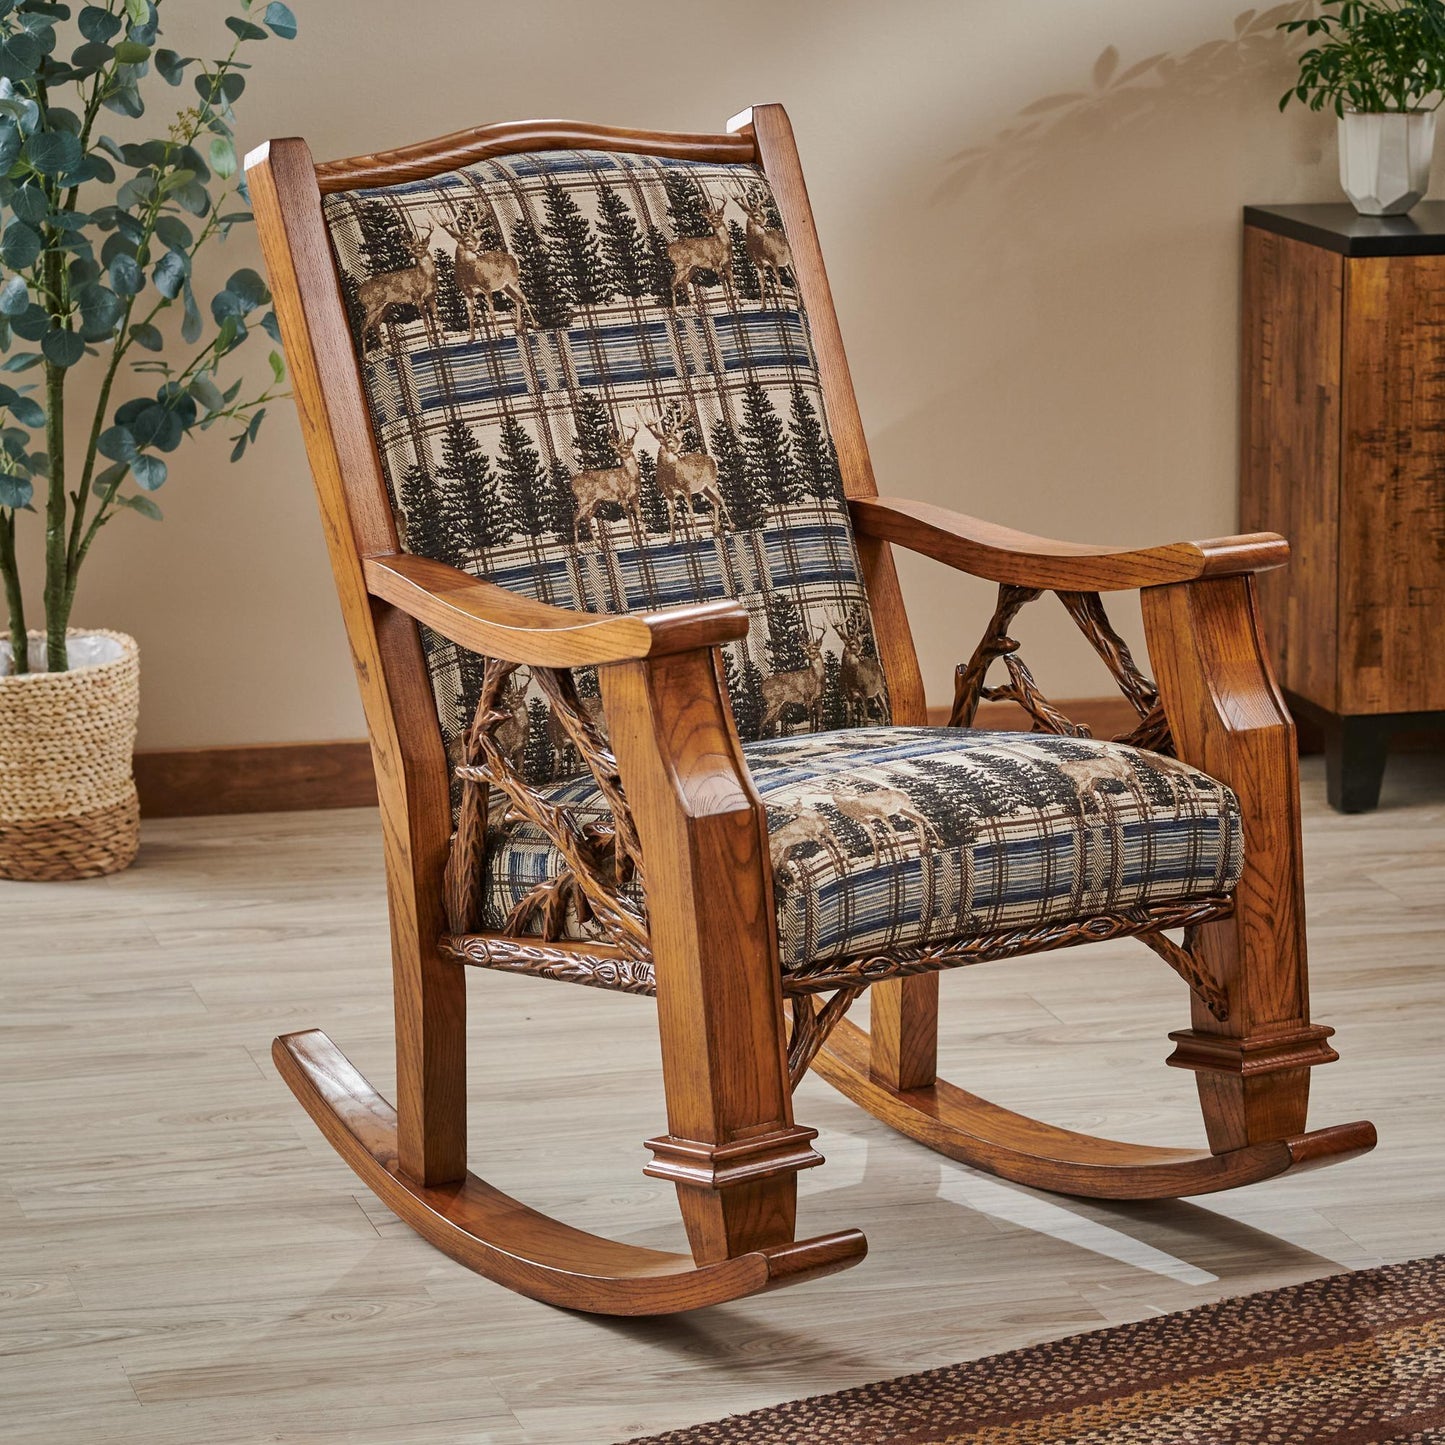 Watchful Whitetail Rocking Chair - Wild Wings